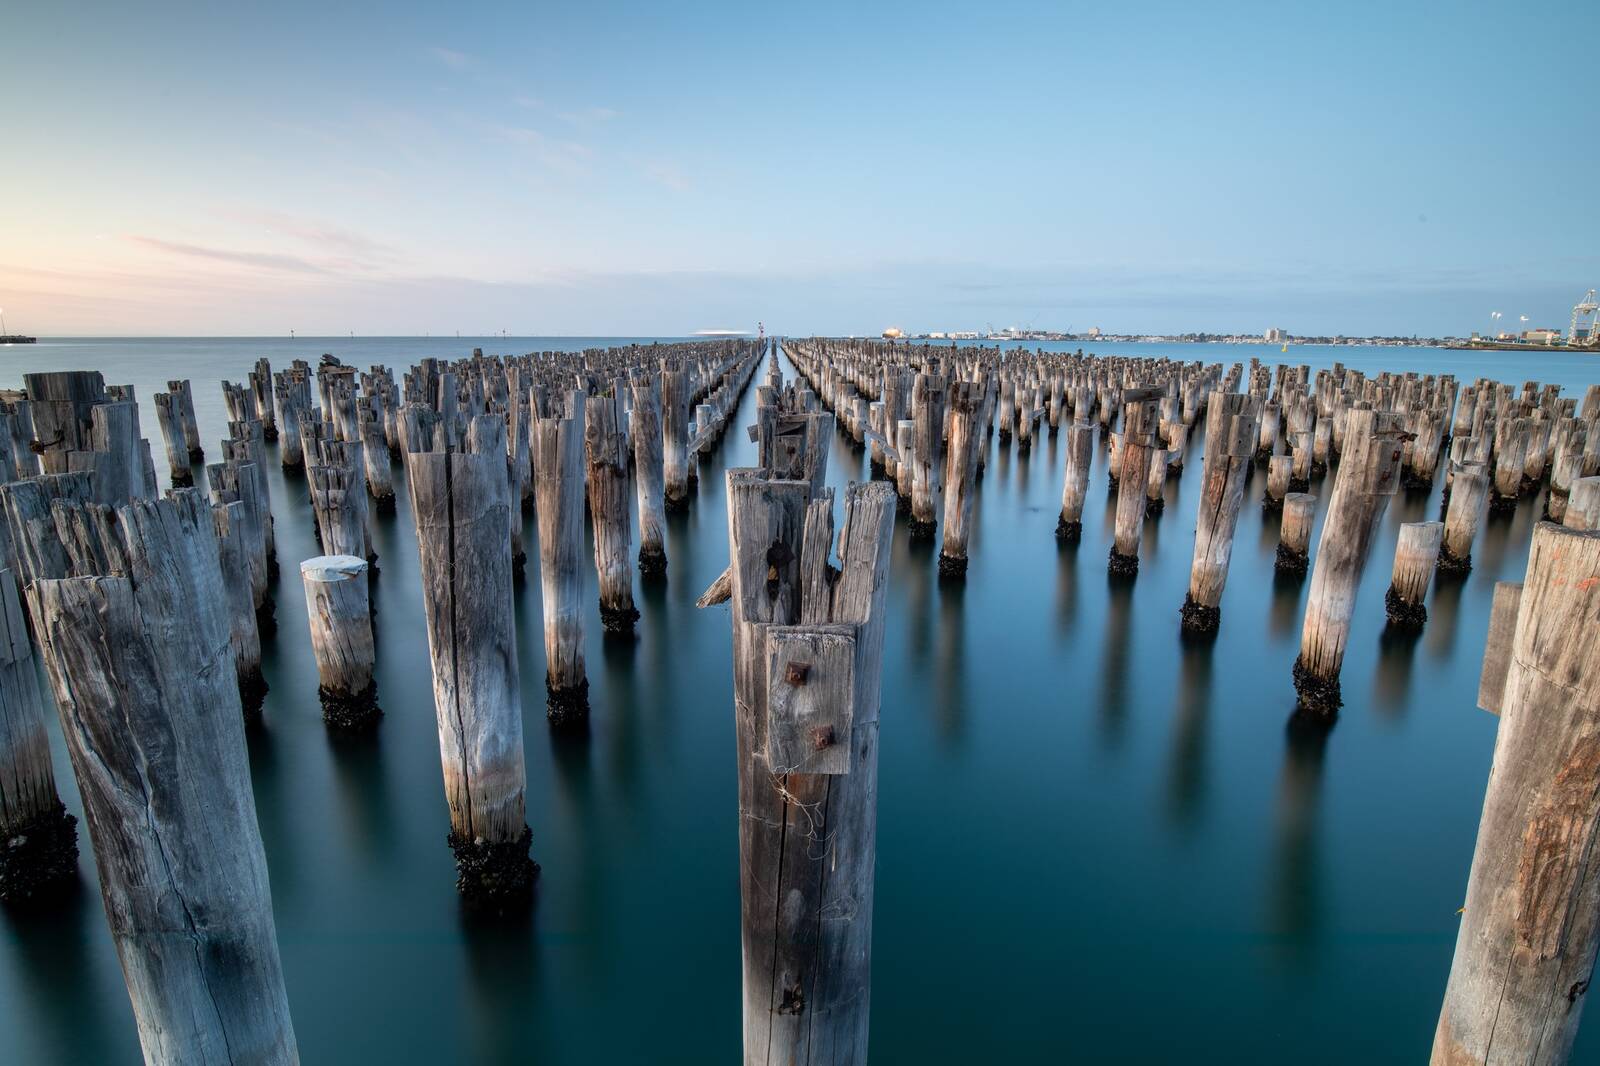 Image of Princes Pier, Melbourne by Thom Newman